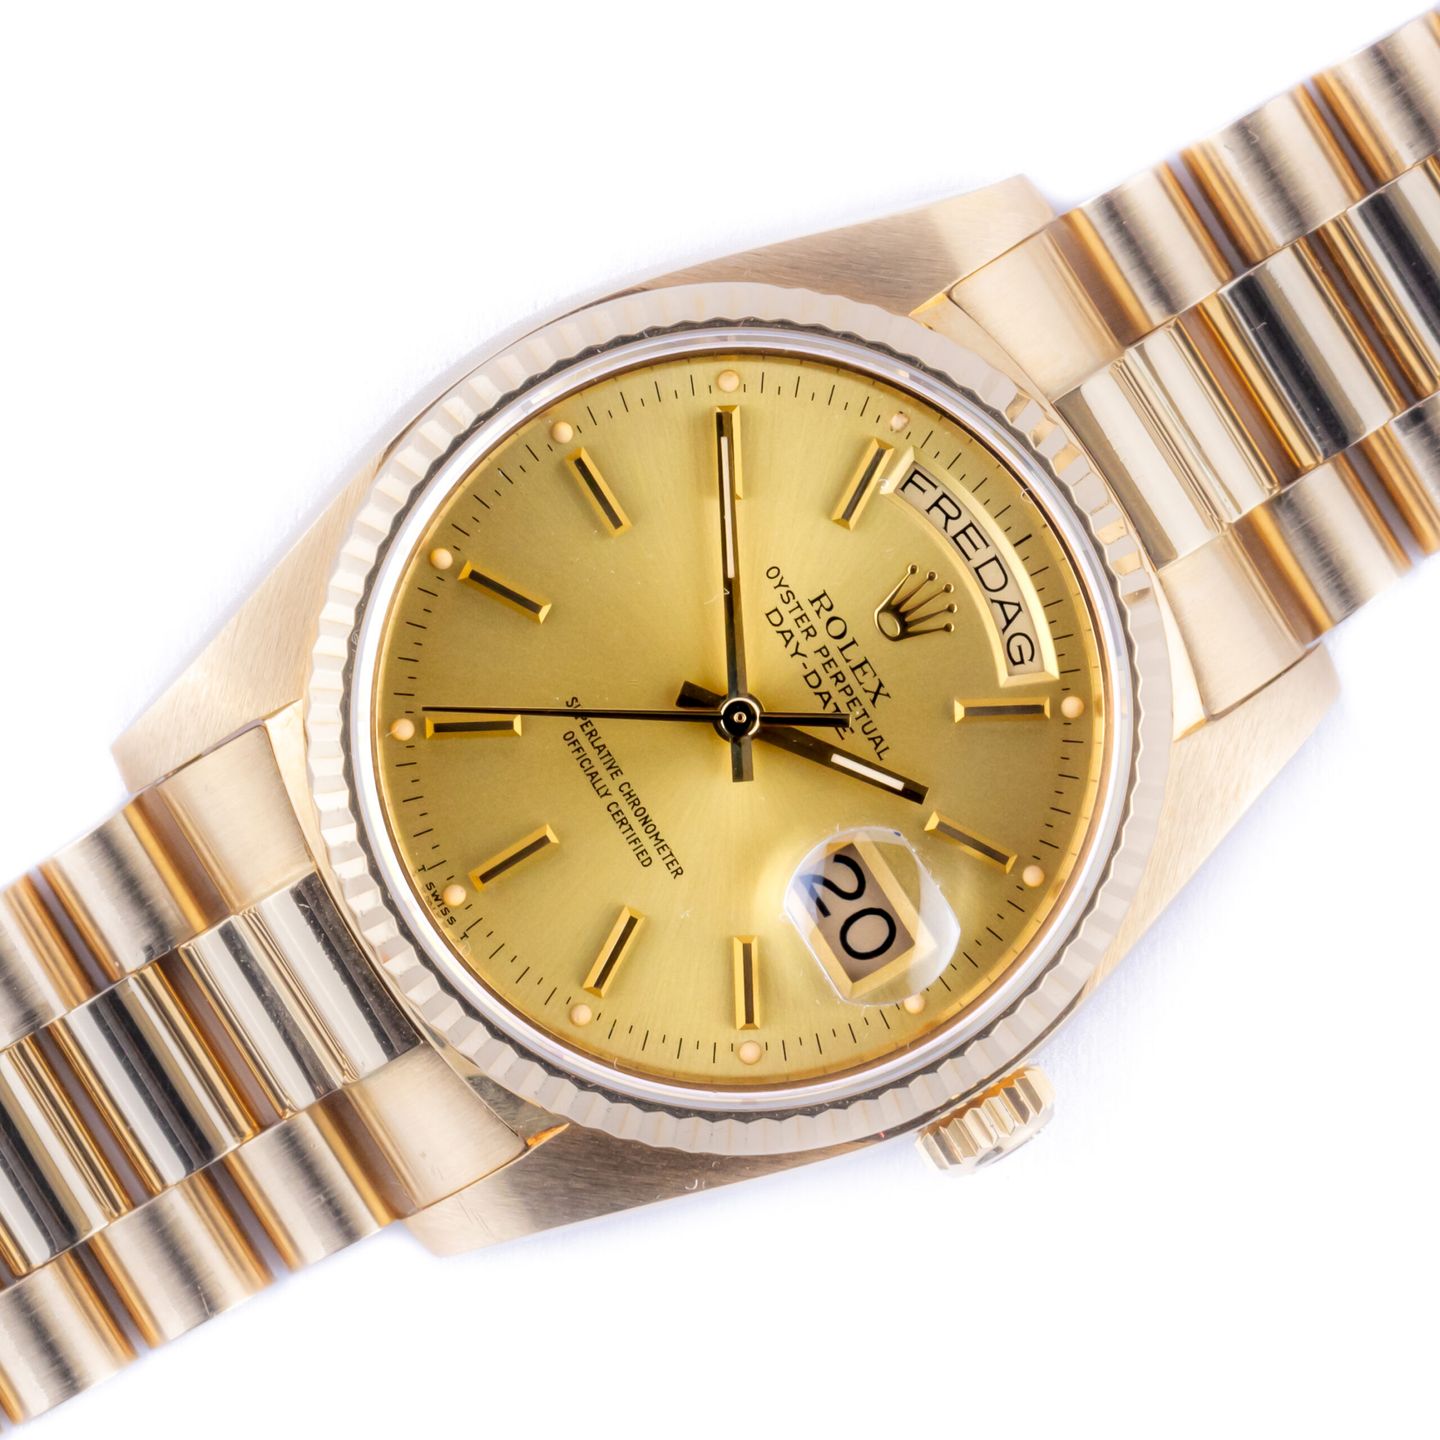 Rolex Day-Date 36 18238 (1995) - Champagne dial 36 mm Yellow Gold case (1/7)